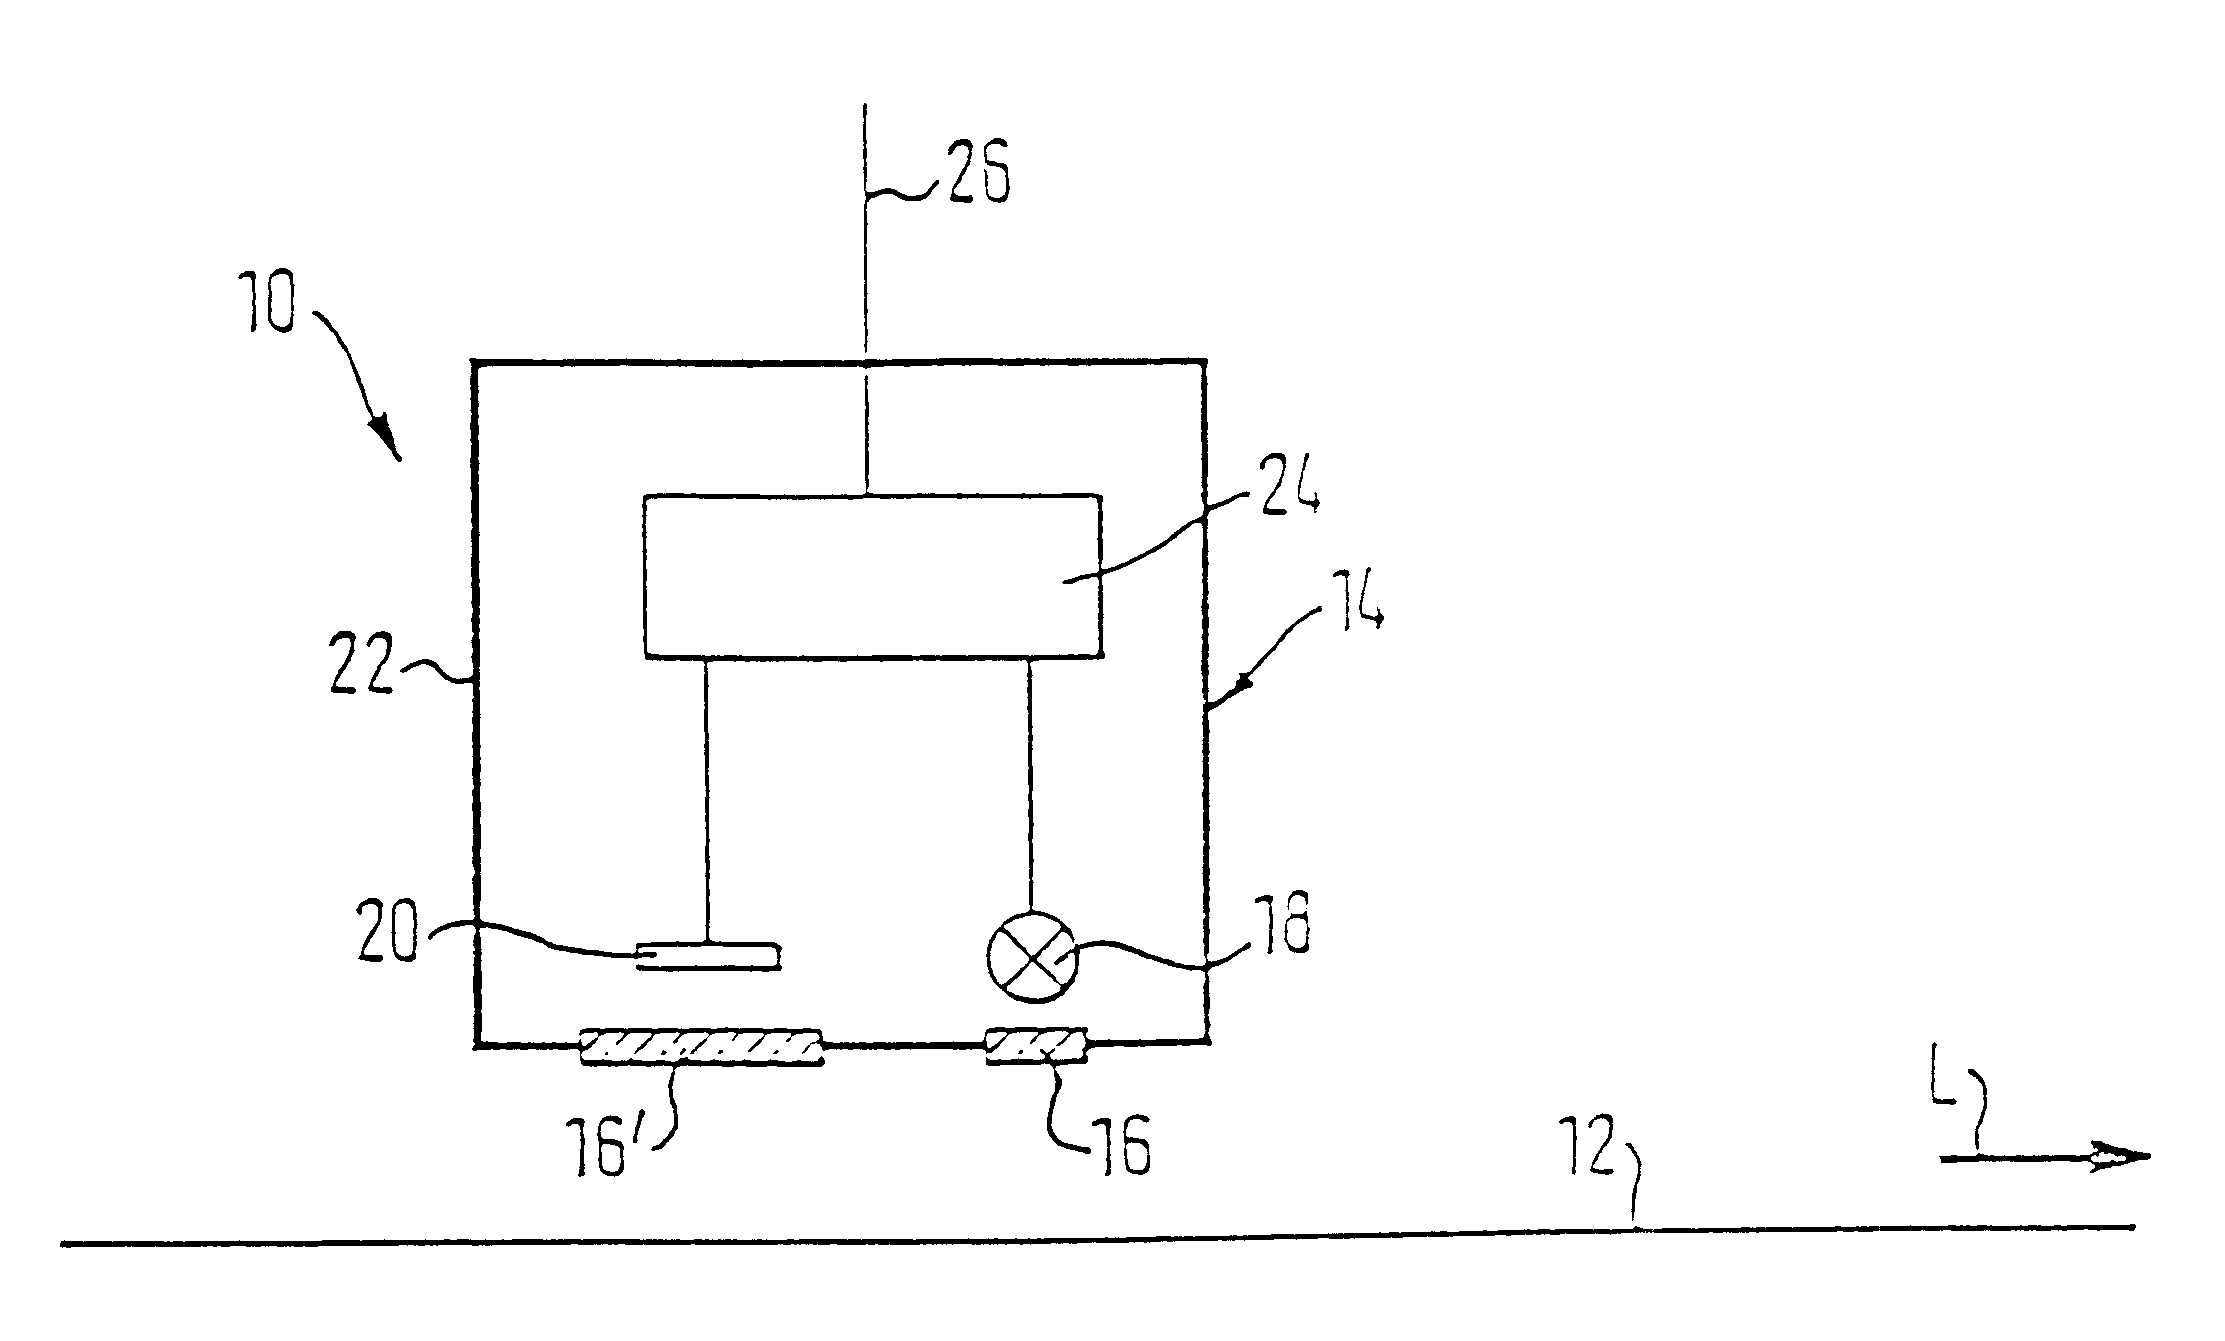 Apparatus and process for a cross-direction profile of a material web